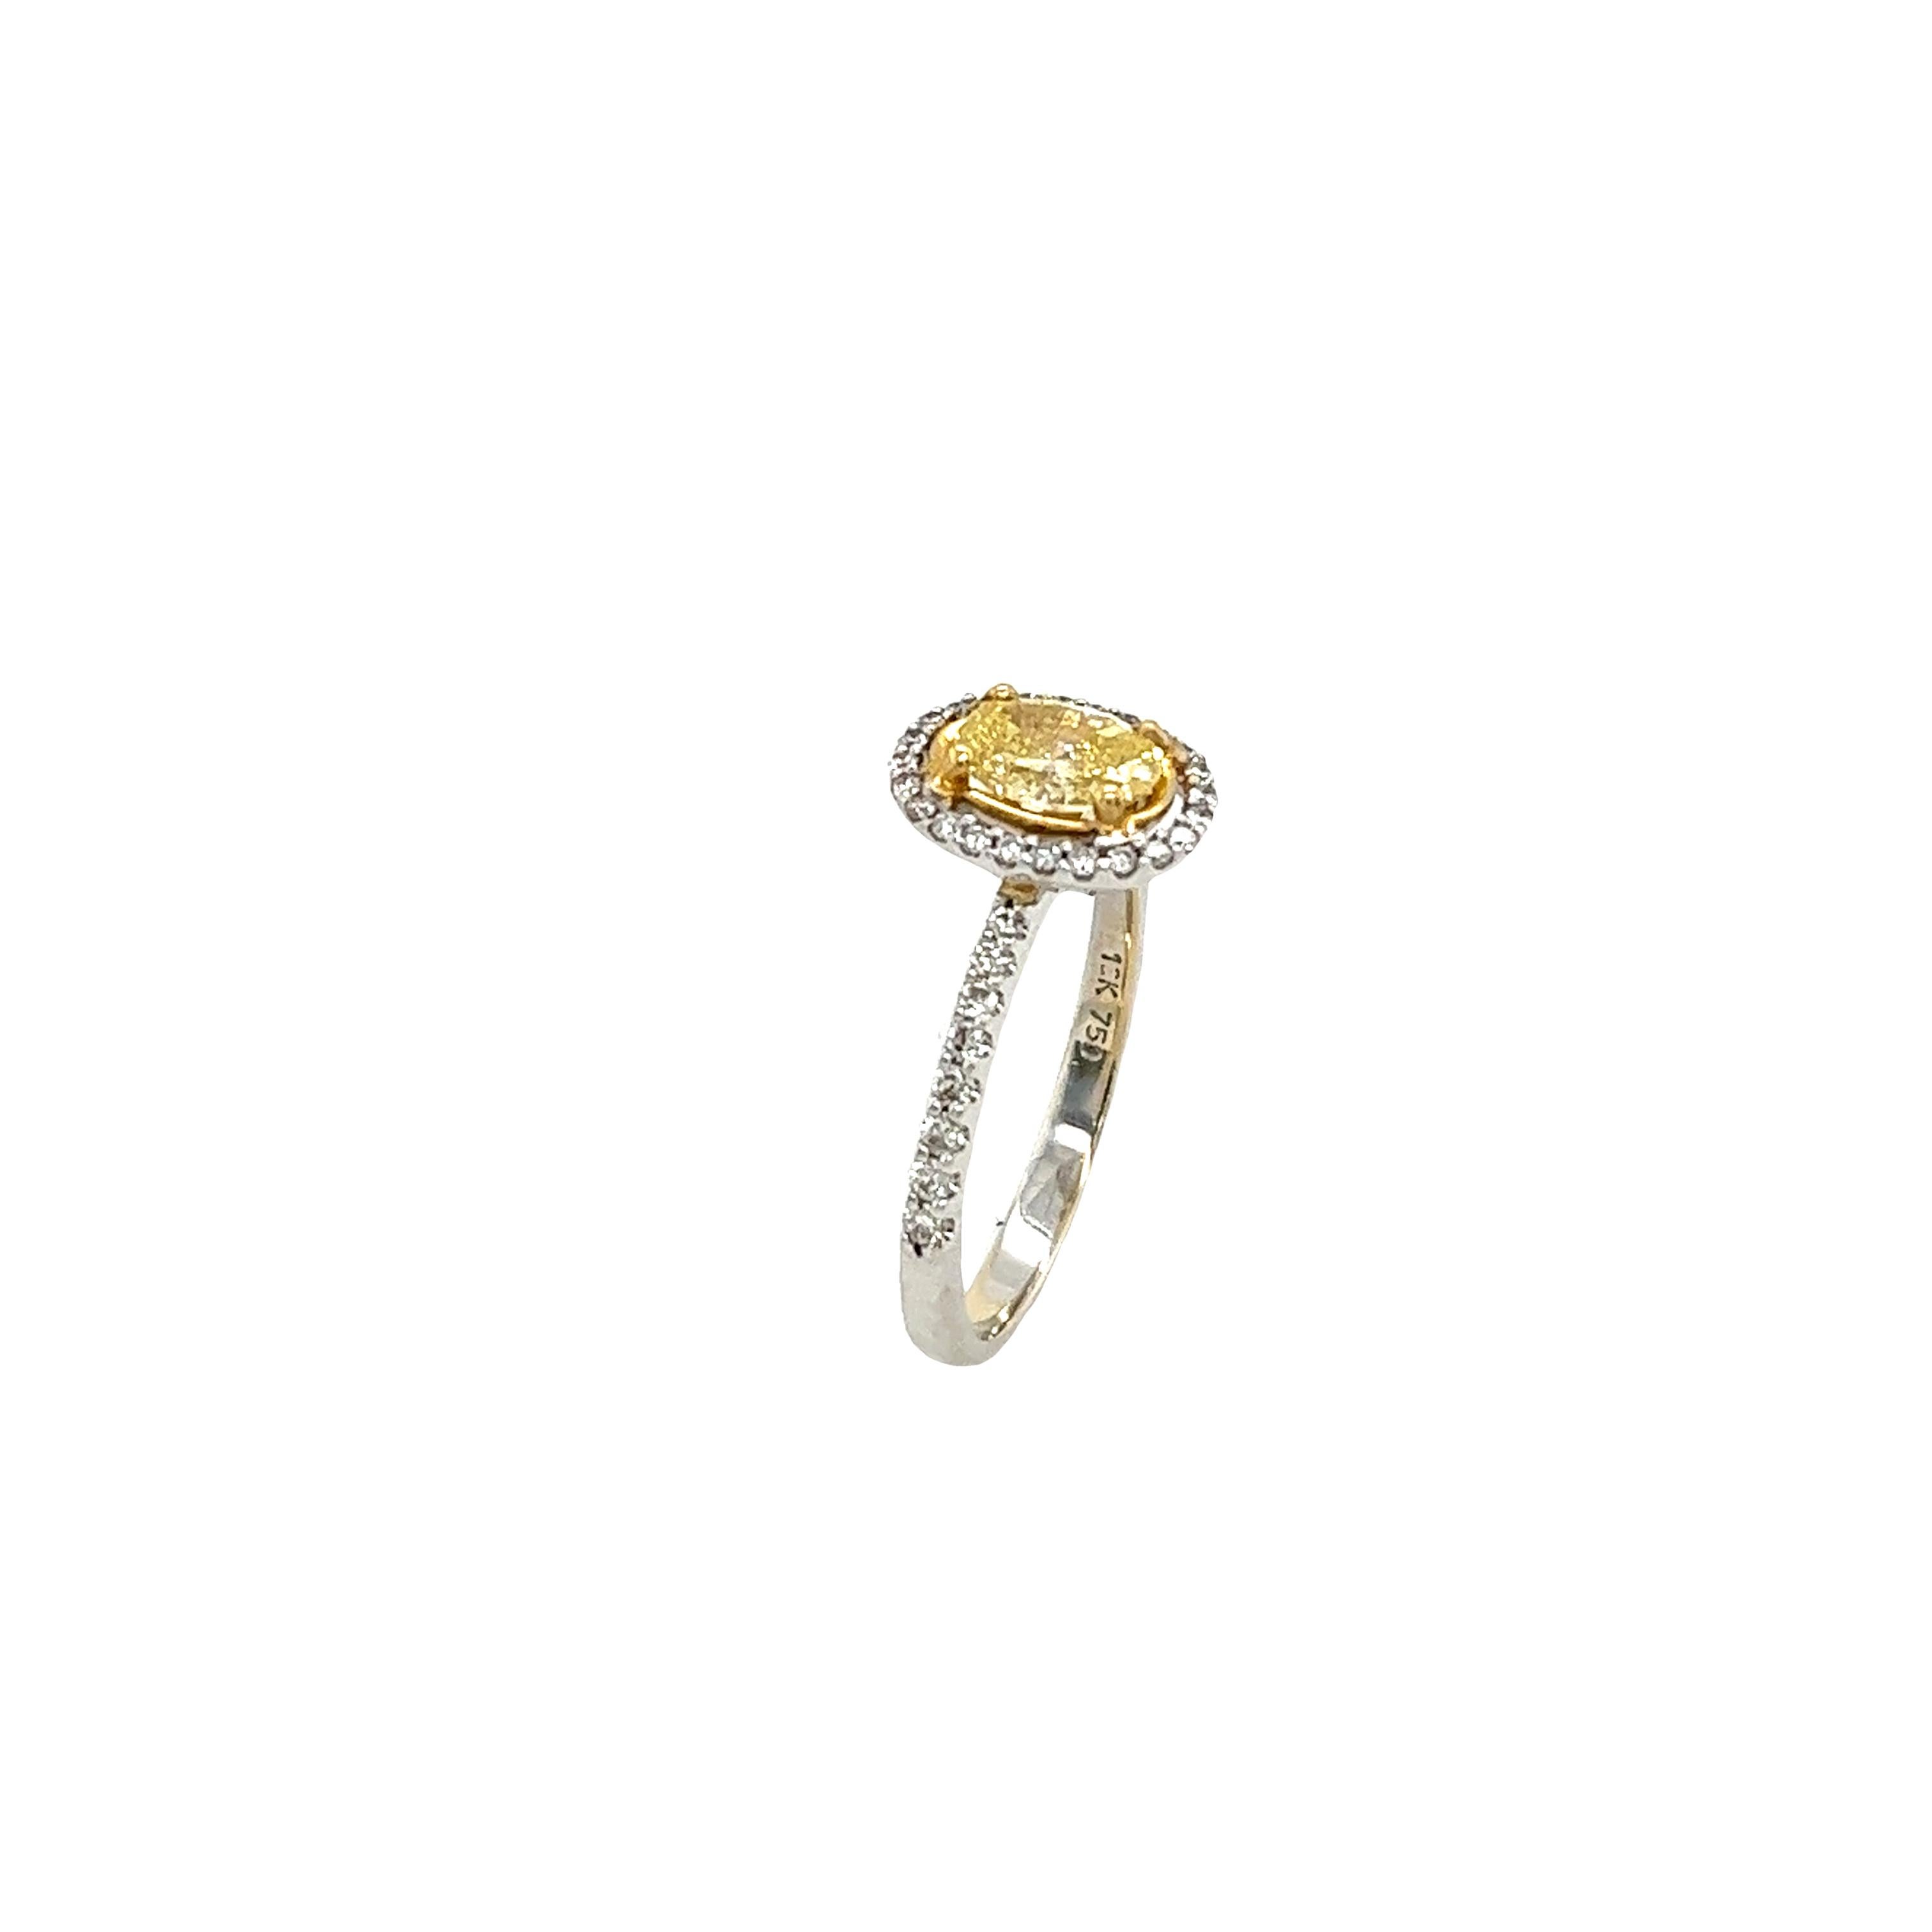 18ct White & Yellow Gold Ring Set With 0.63ct Fancy Yellow SI1 Oval Diamond For Sale 5